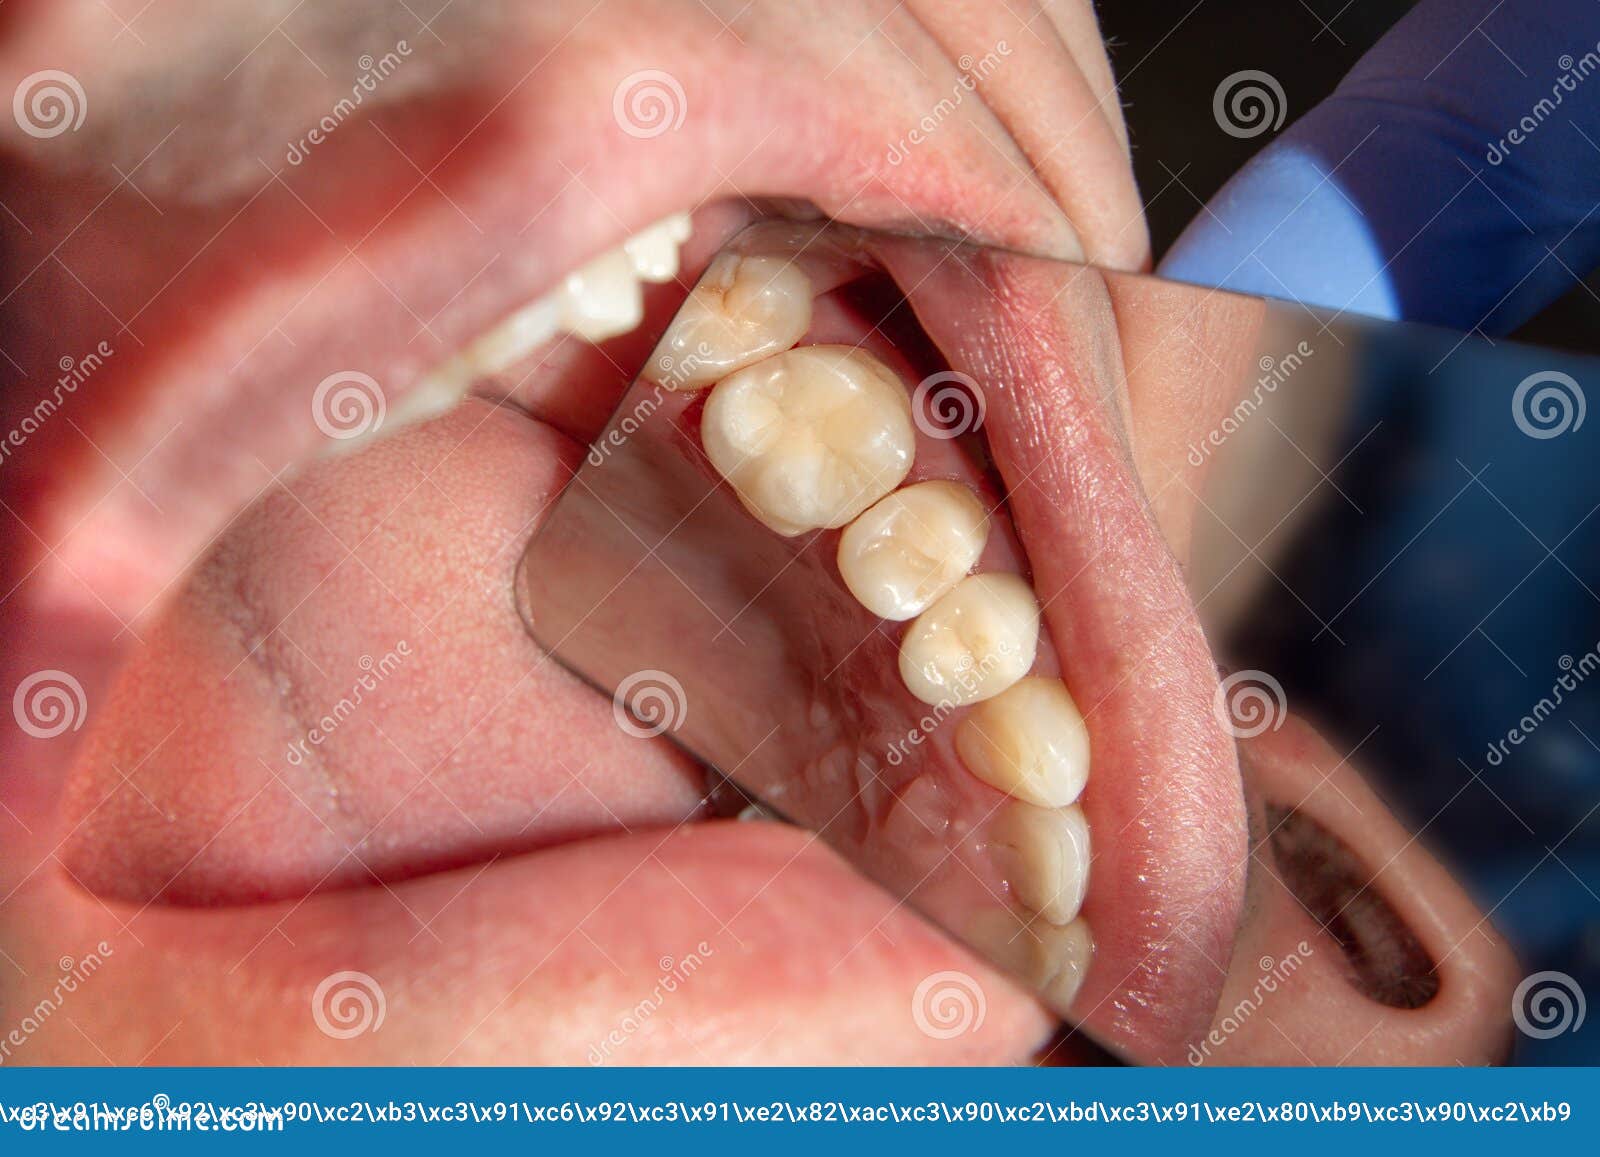 dental treatment in dental clinic. rotten carious tooth macro. treatment endodontic canals